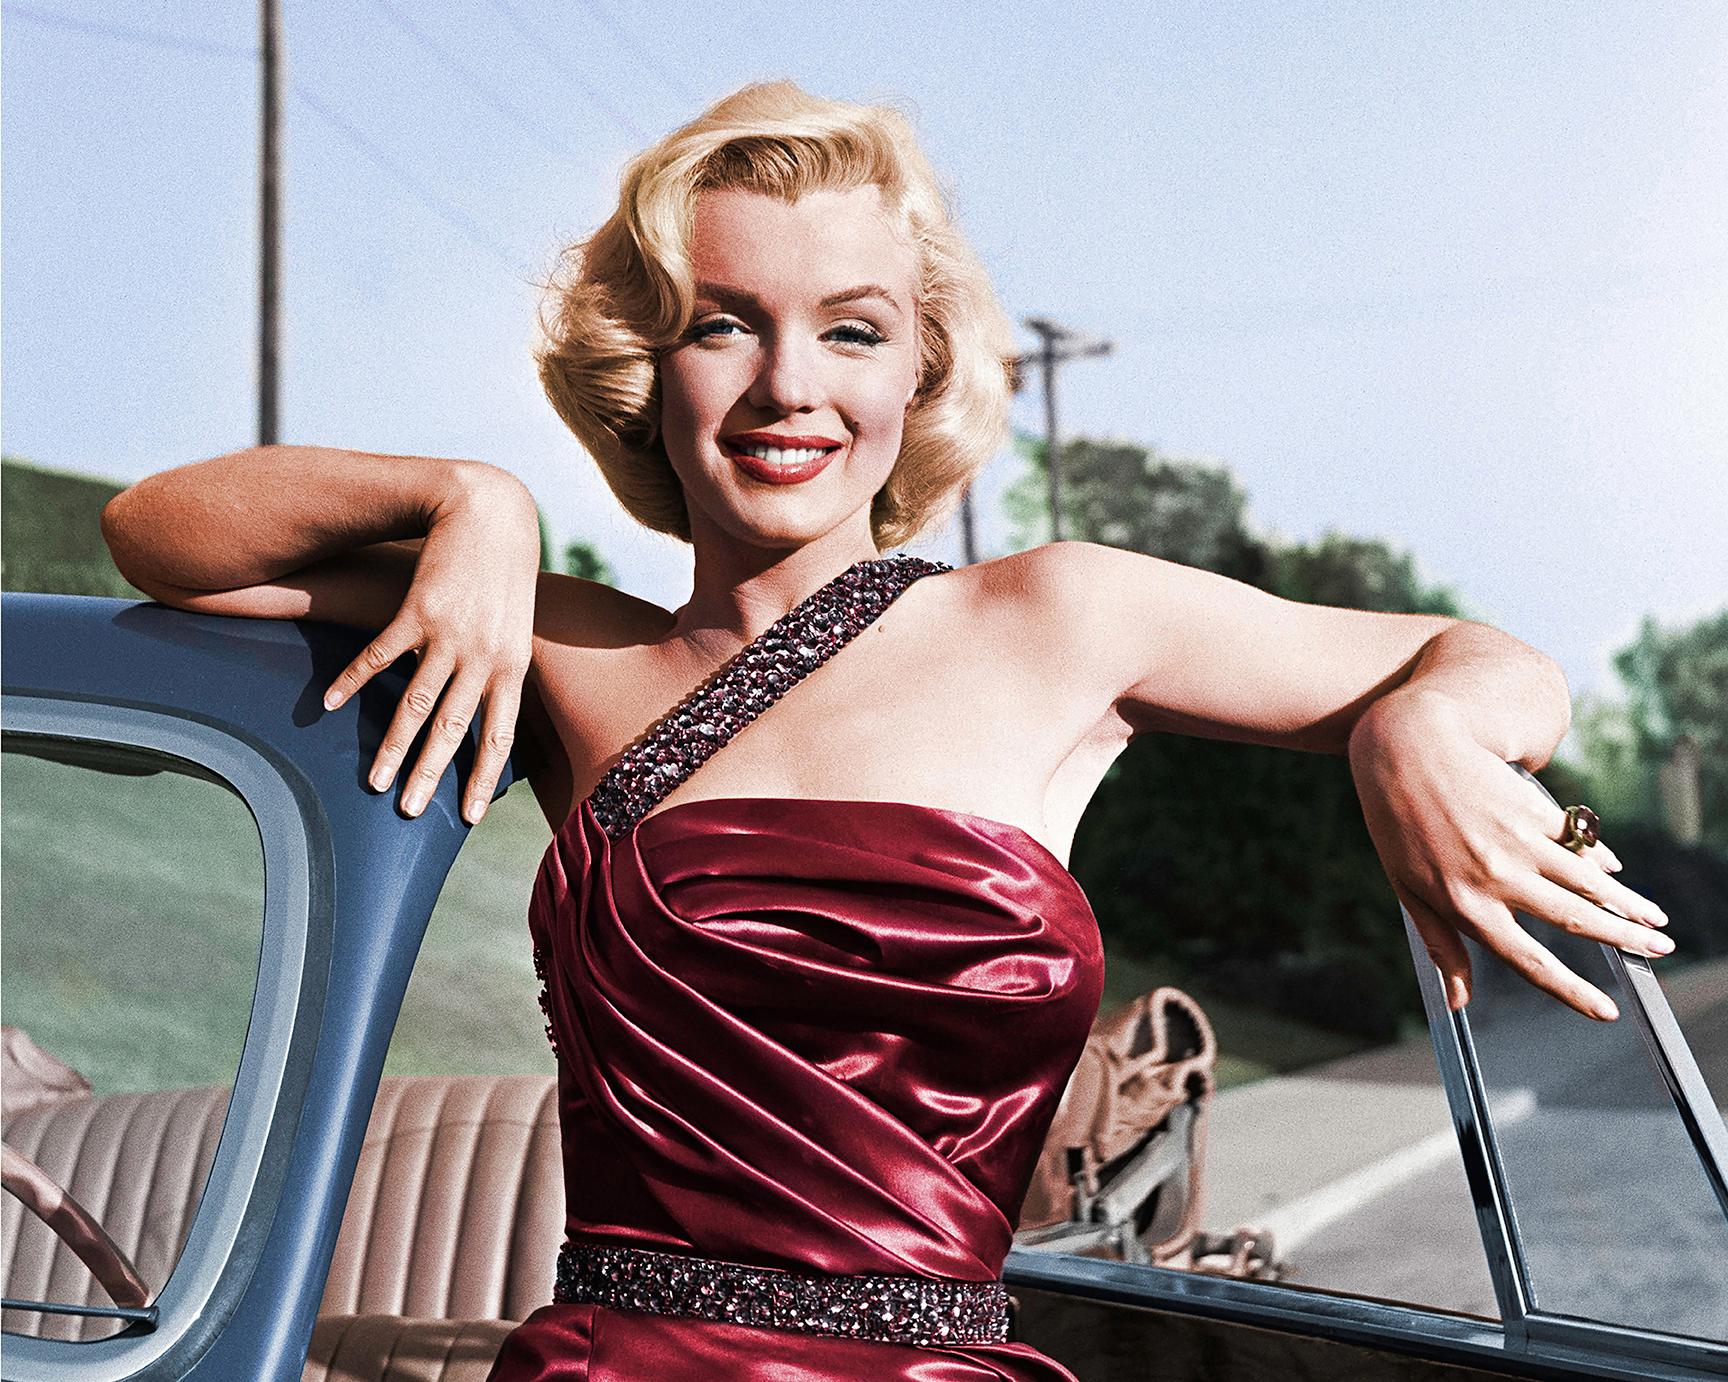 Frank Worth Portrait Photograph - Marilyn Monroe with Classic Roadster for "How to Marry a Millionaire"